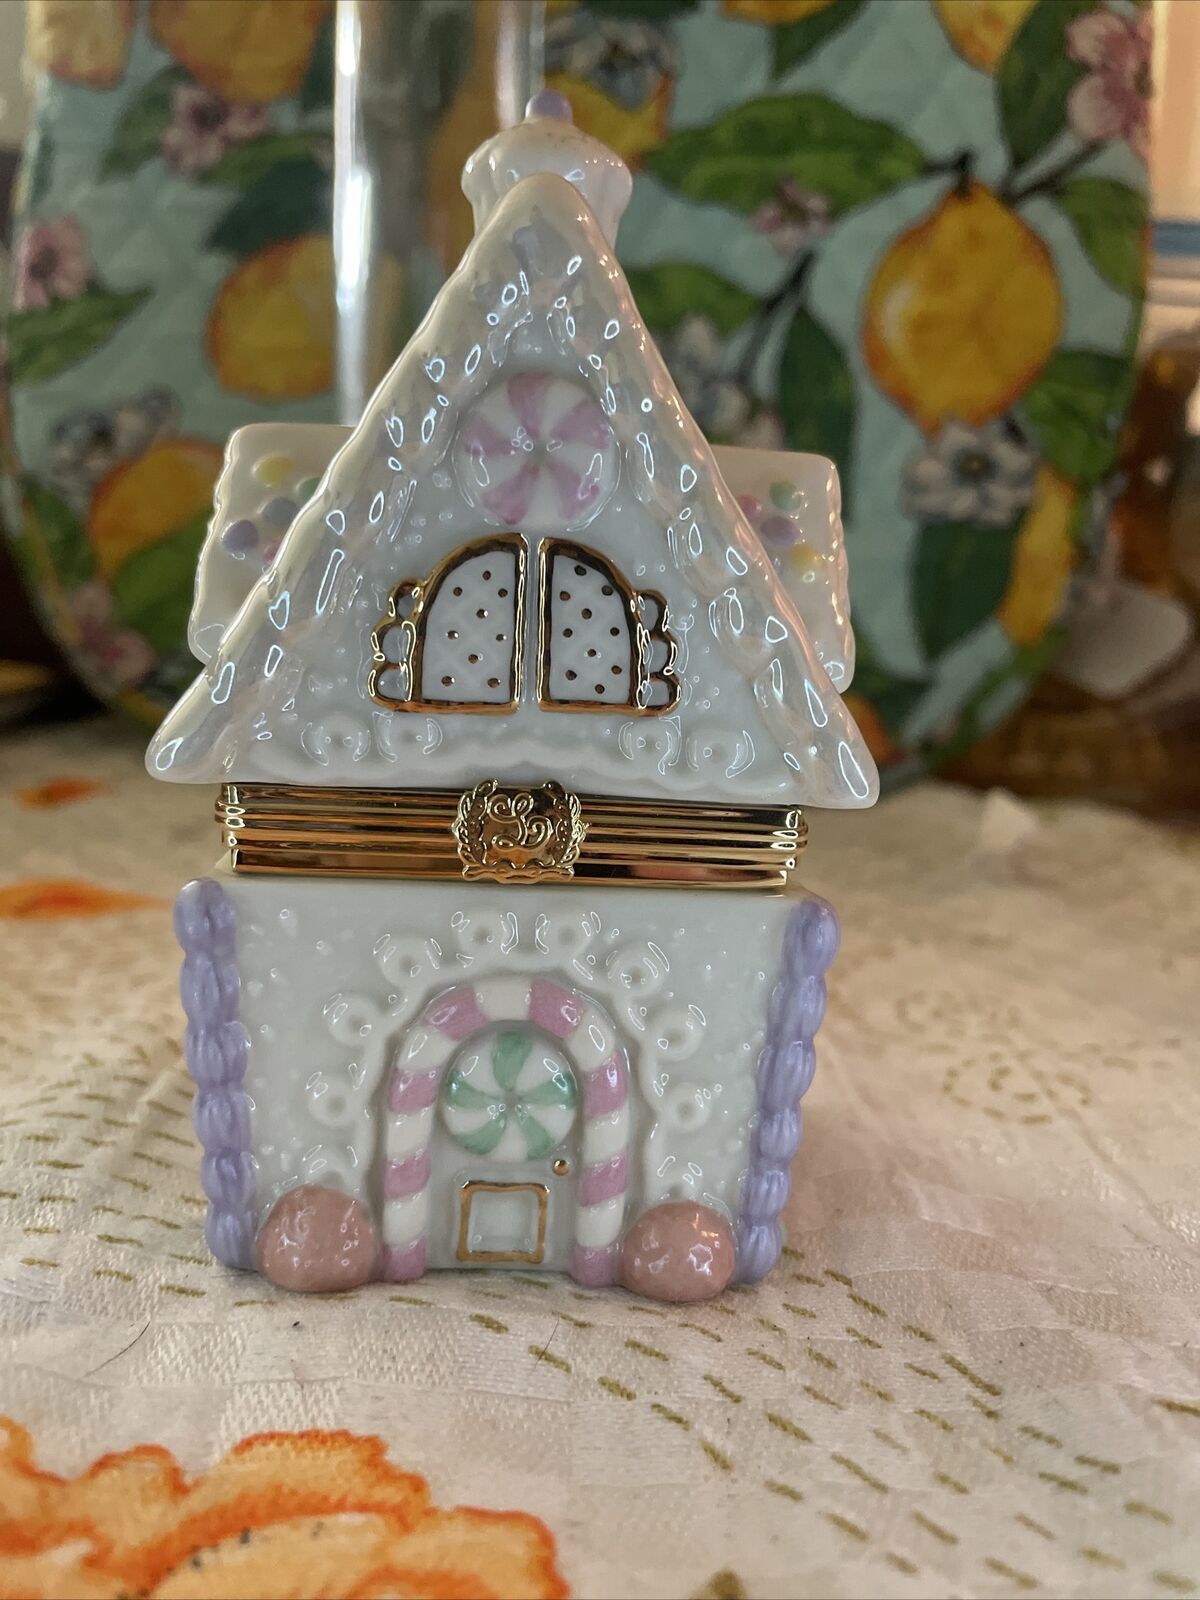 Lenox Treasures Gingerbread Holiday Surprise Trinket Box & Ornament First Issue